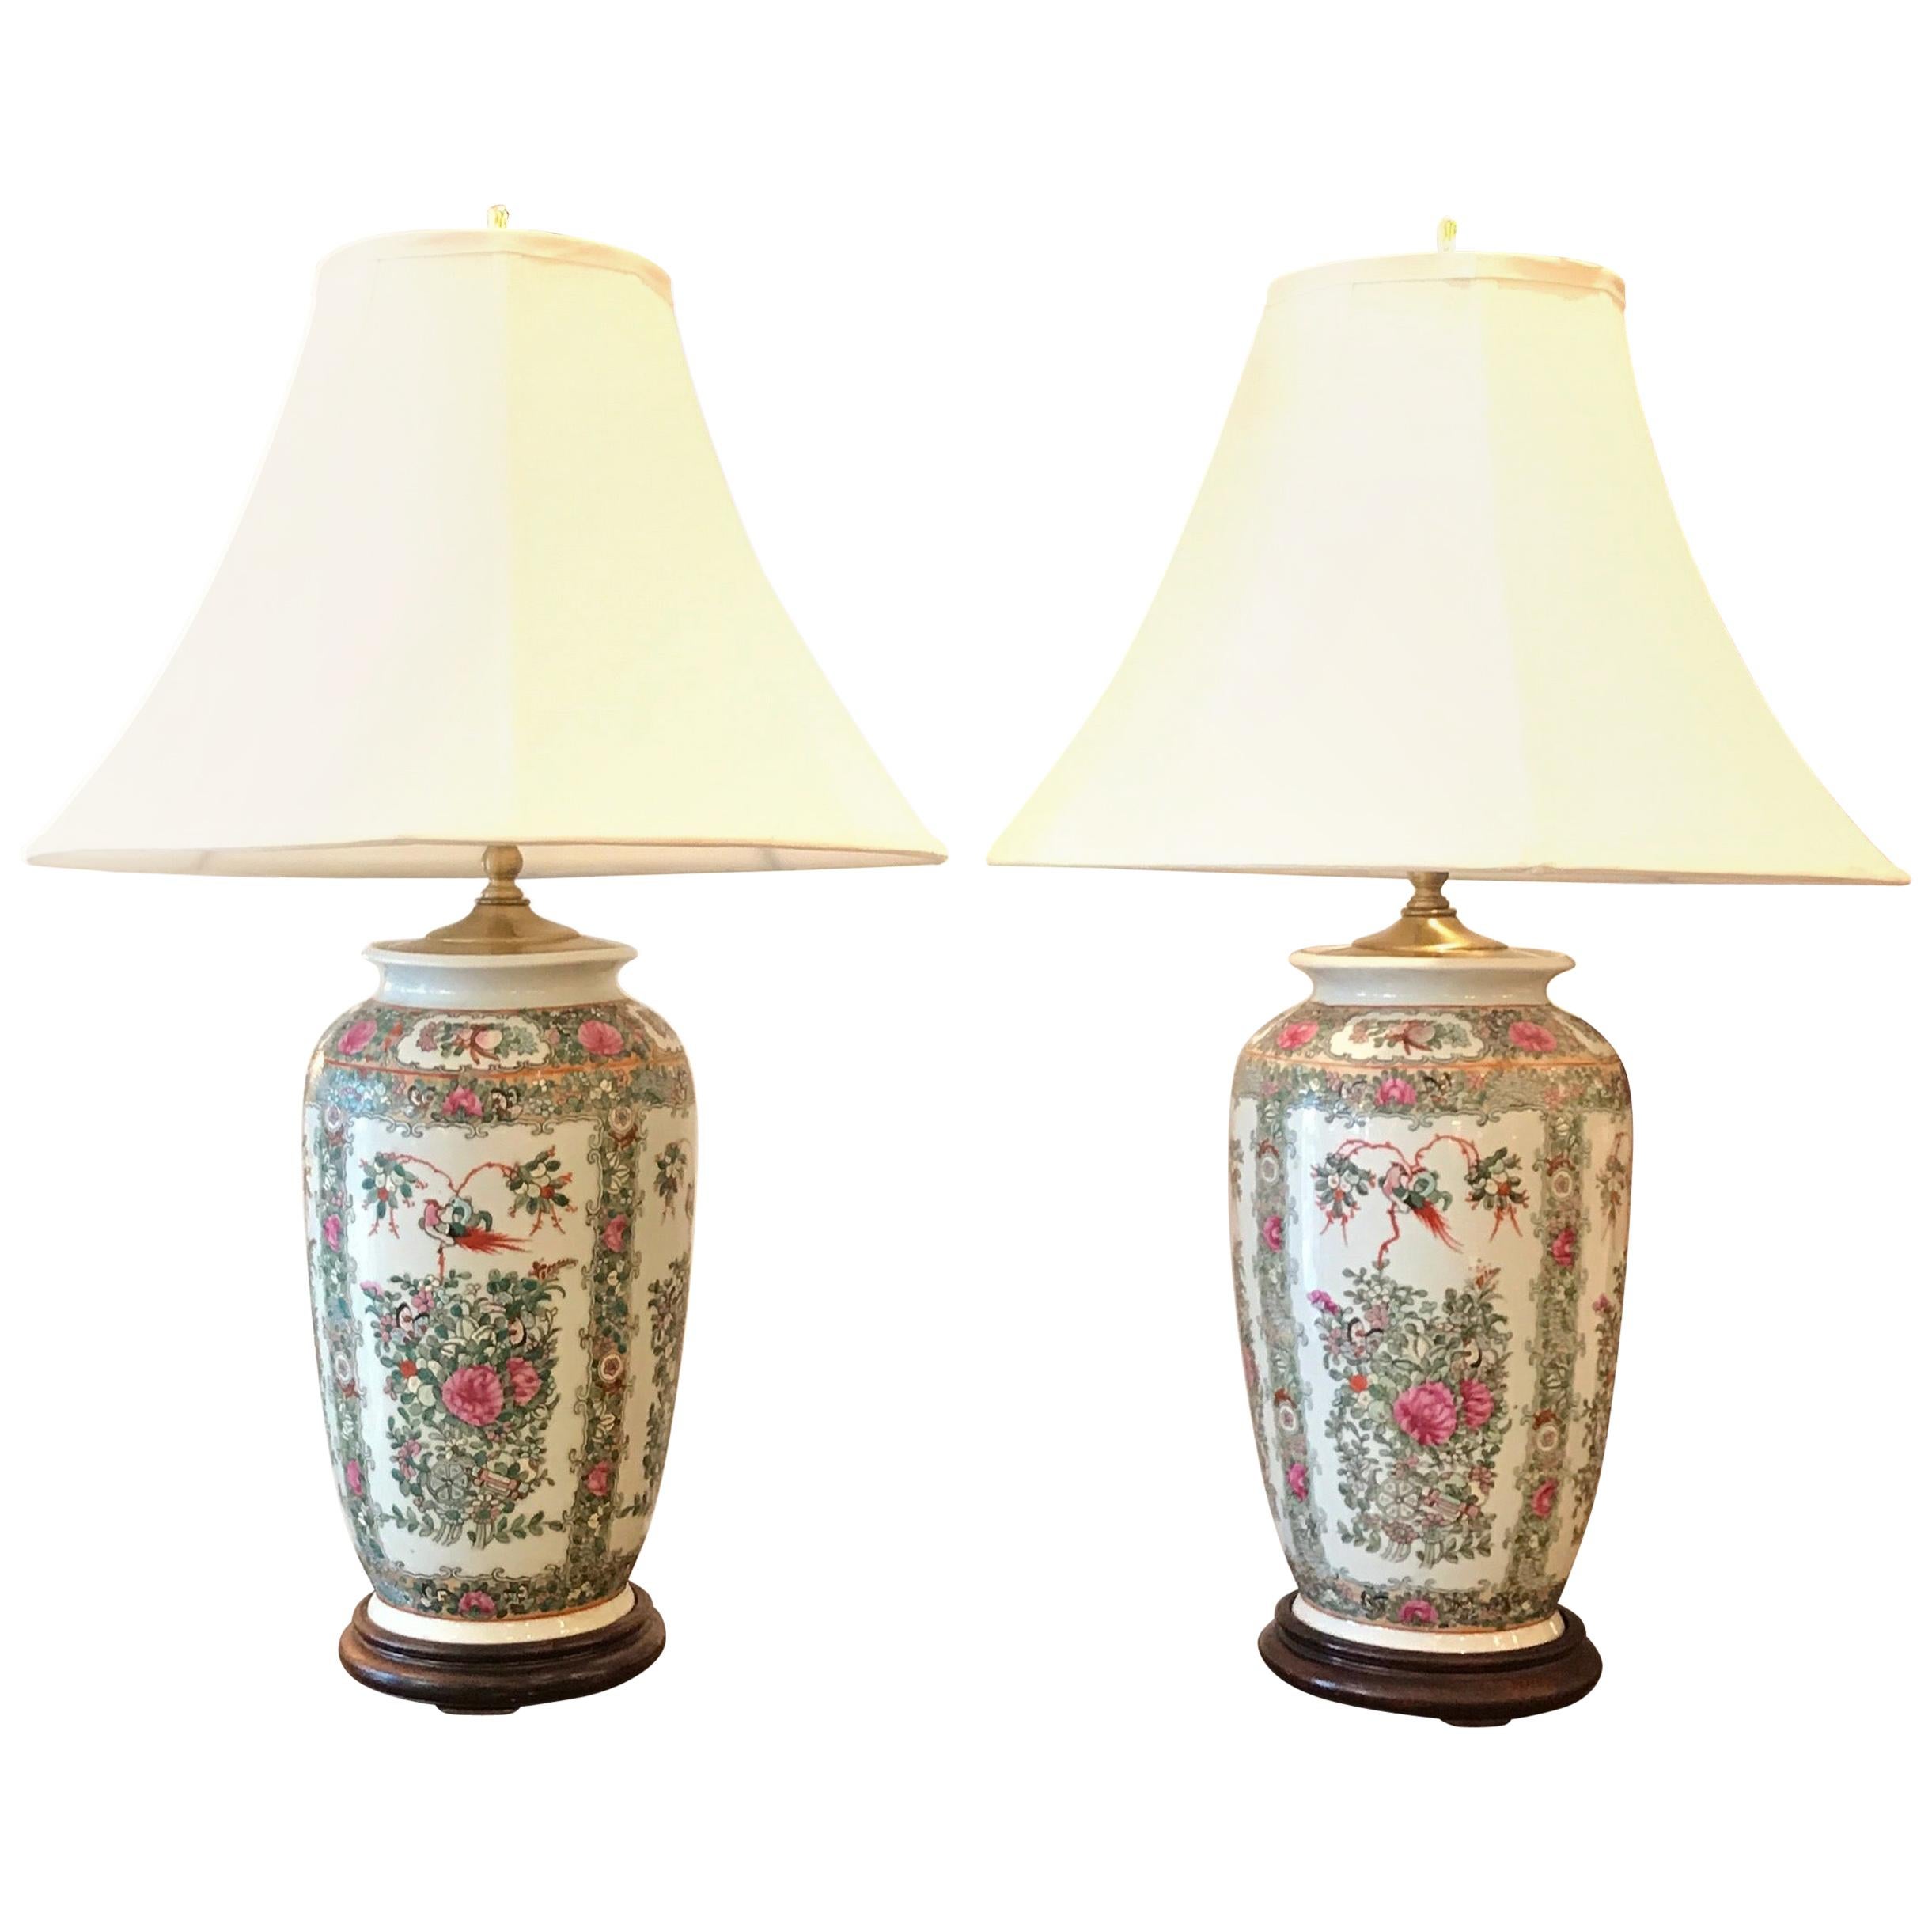 Pair of Chinese Export Porcelain Lamps